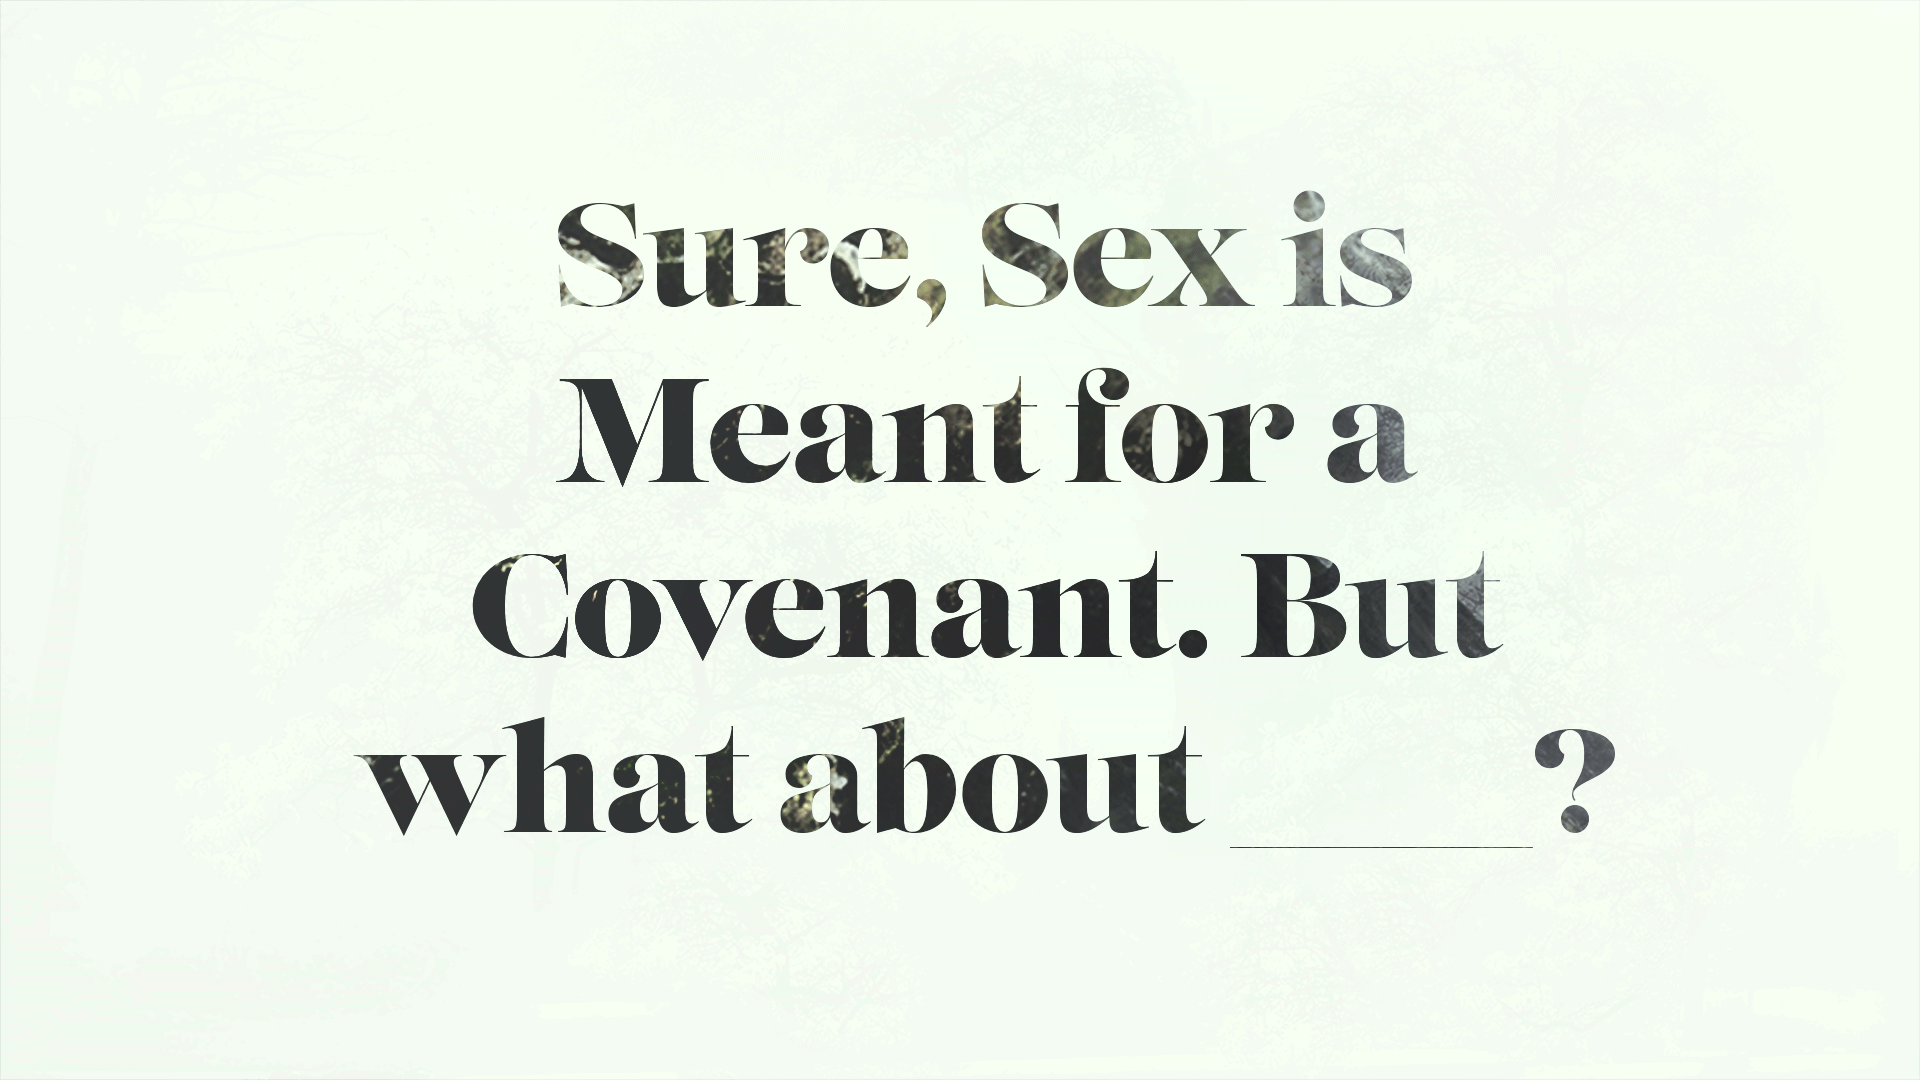 Sure, Sex is Meant for a Covenant image